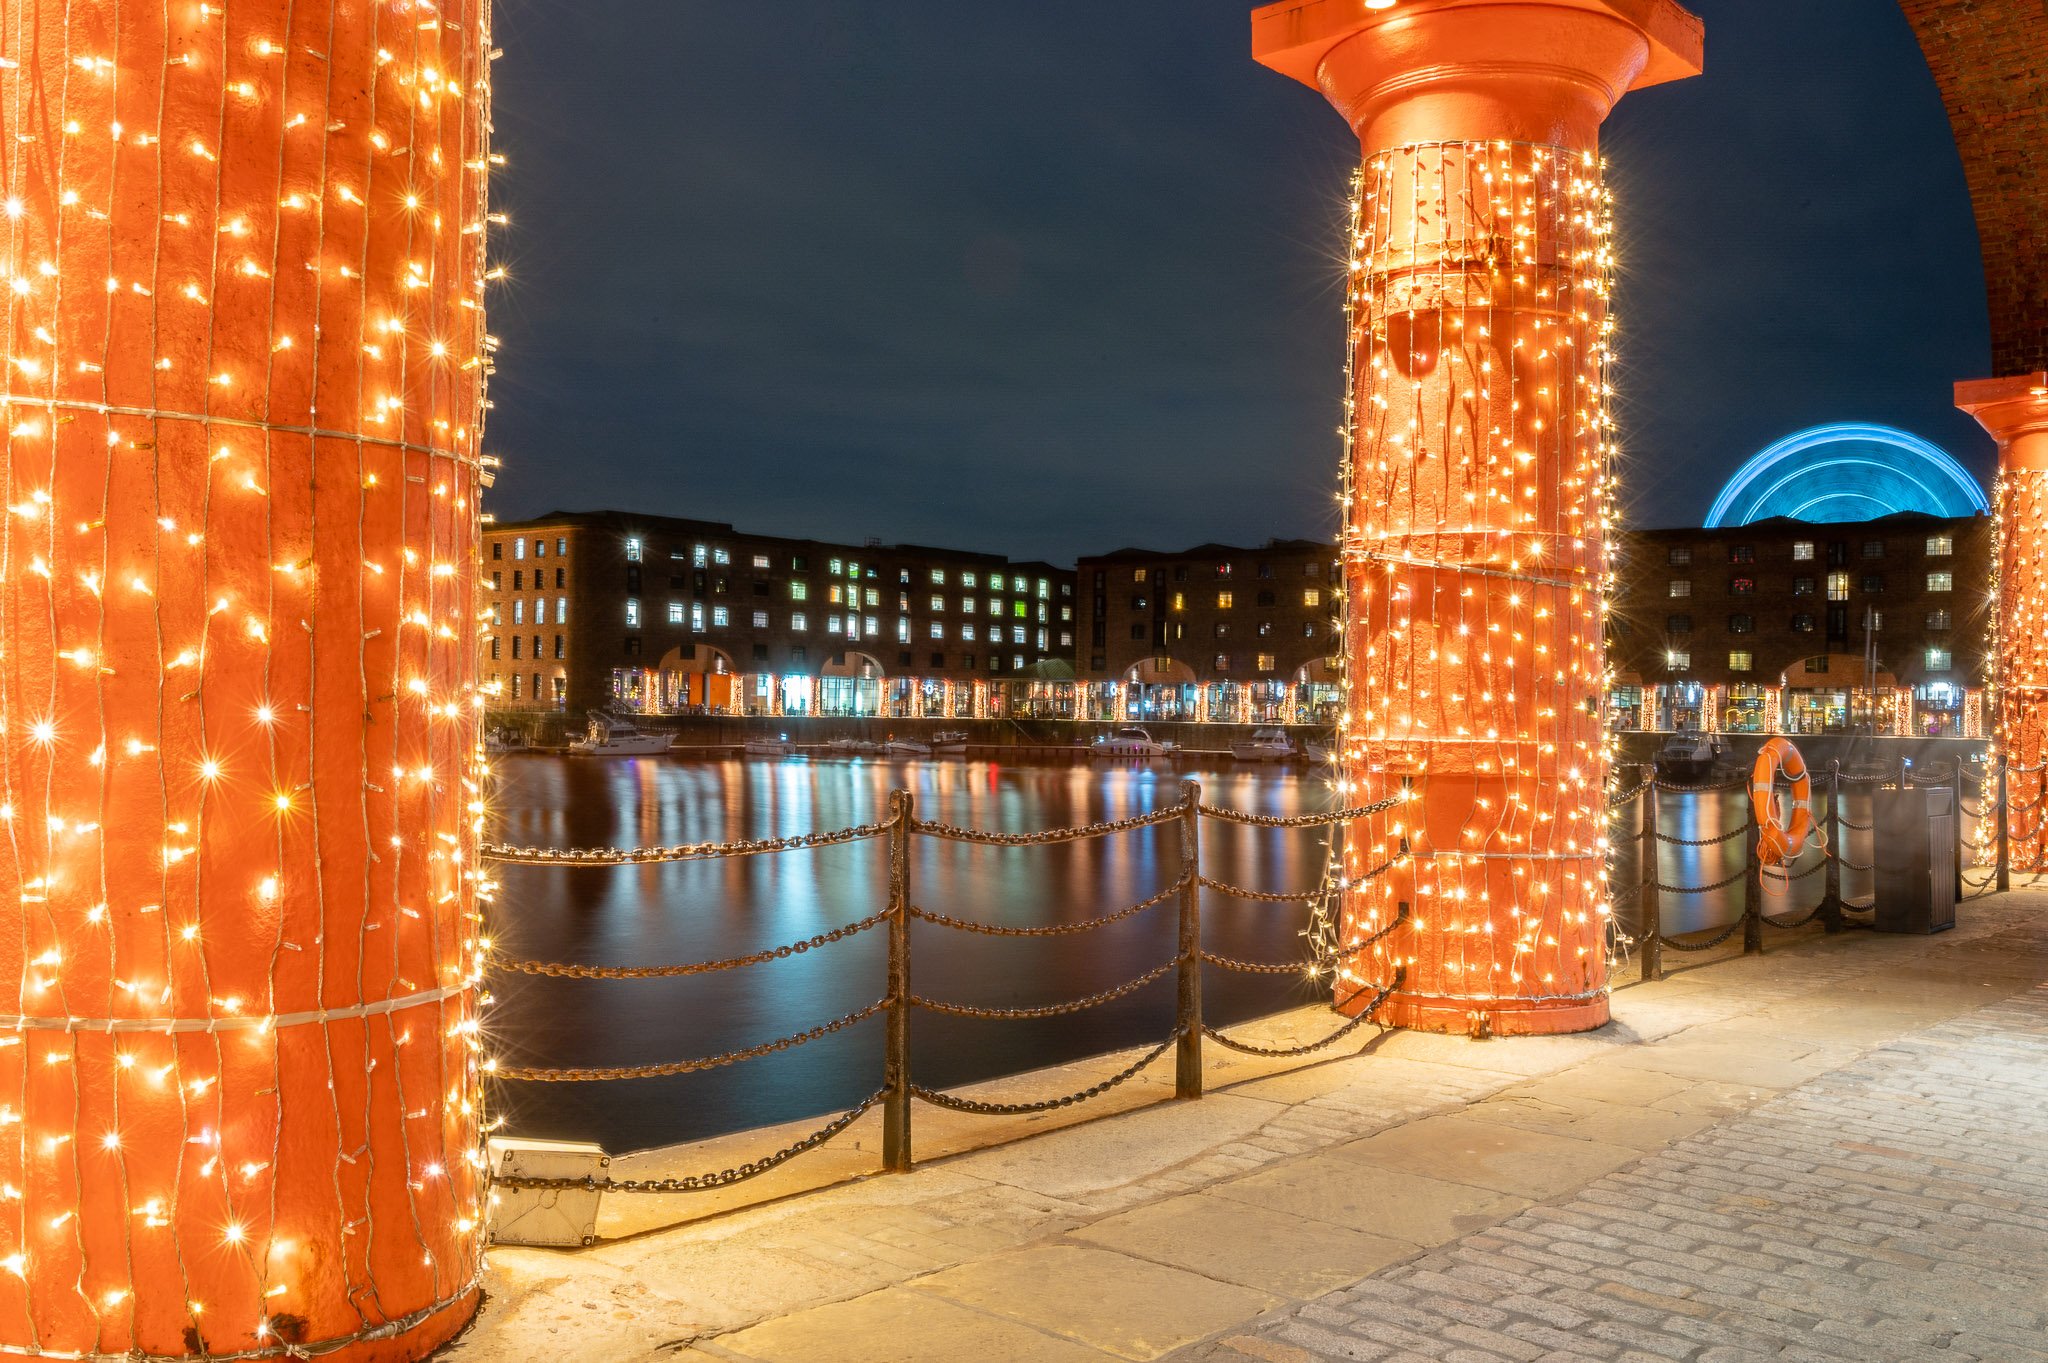 Dusk view of Albert Dock from the colonnades area. Behind the buildings, a viewing wheel spins. There are fairy lights on each column of the colonnades.